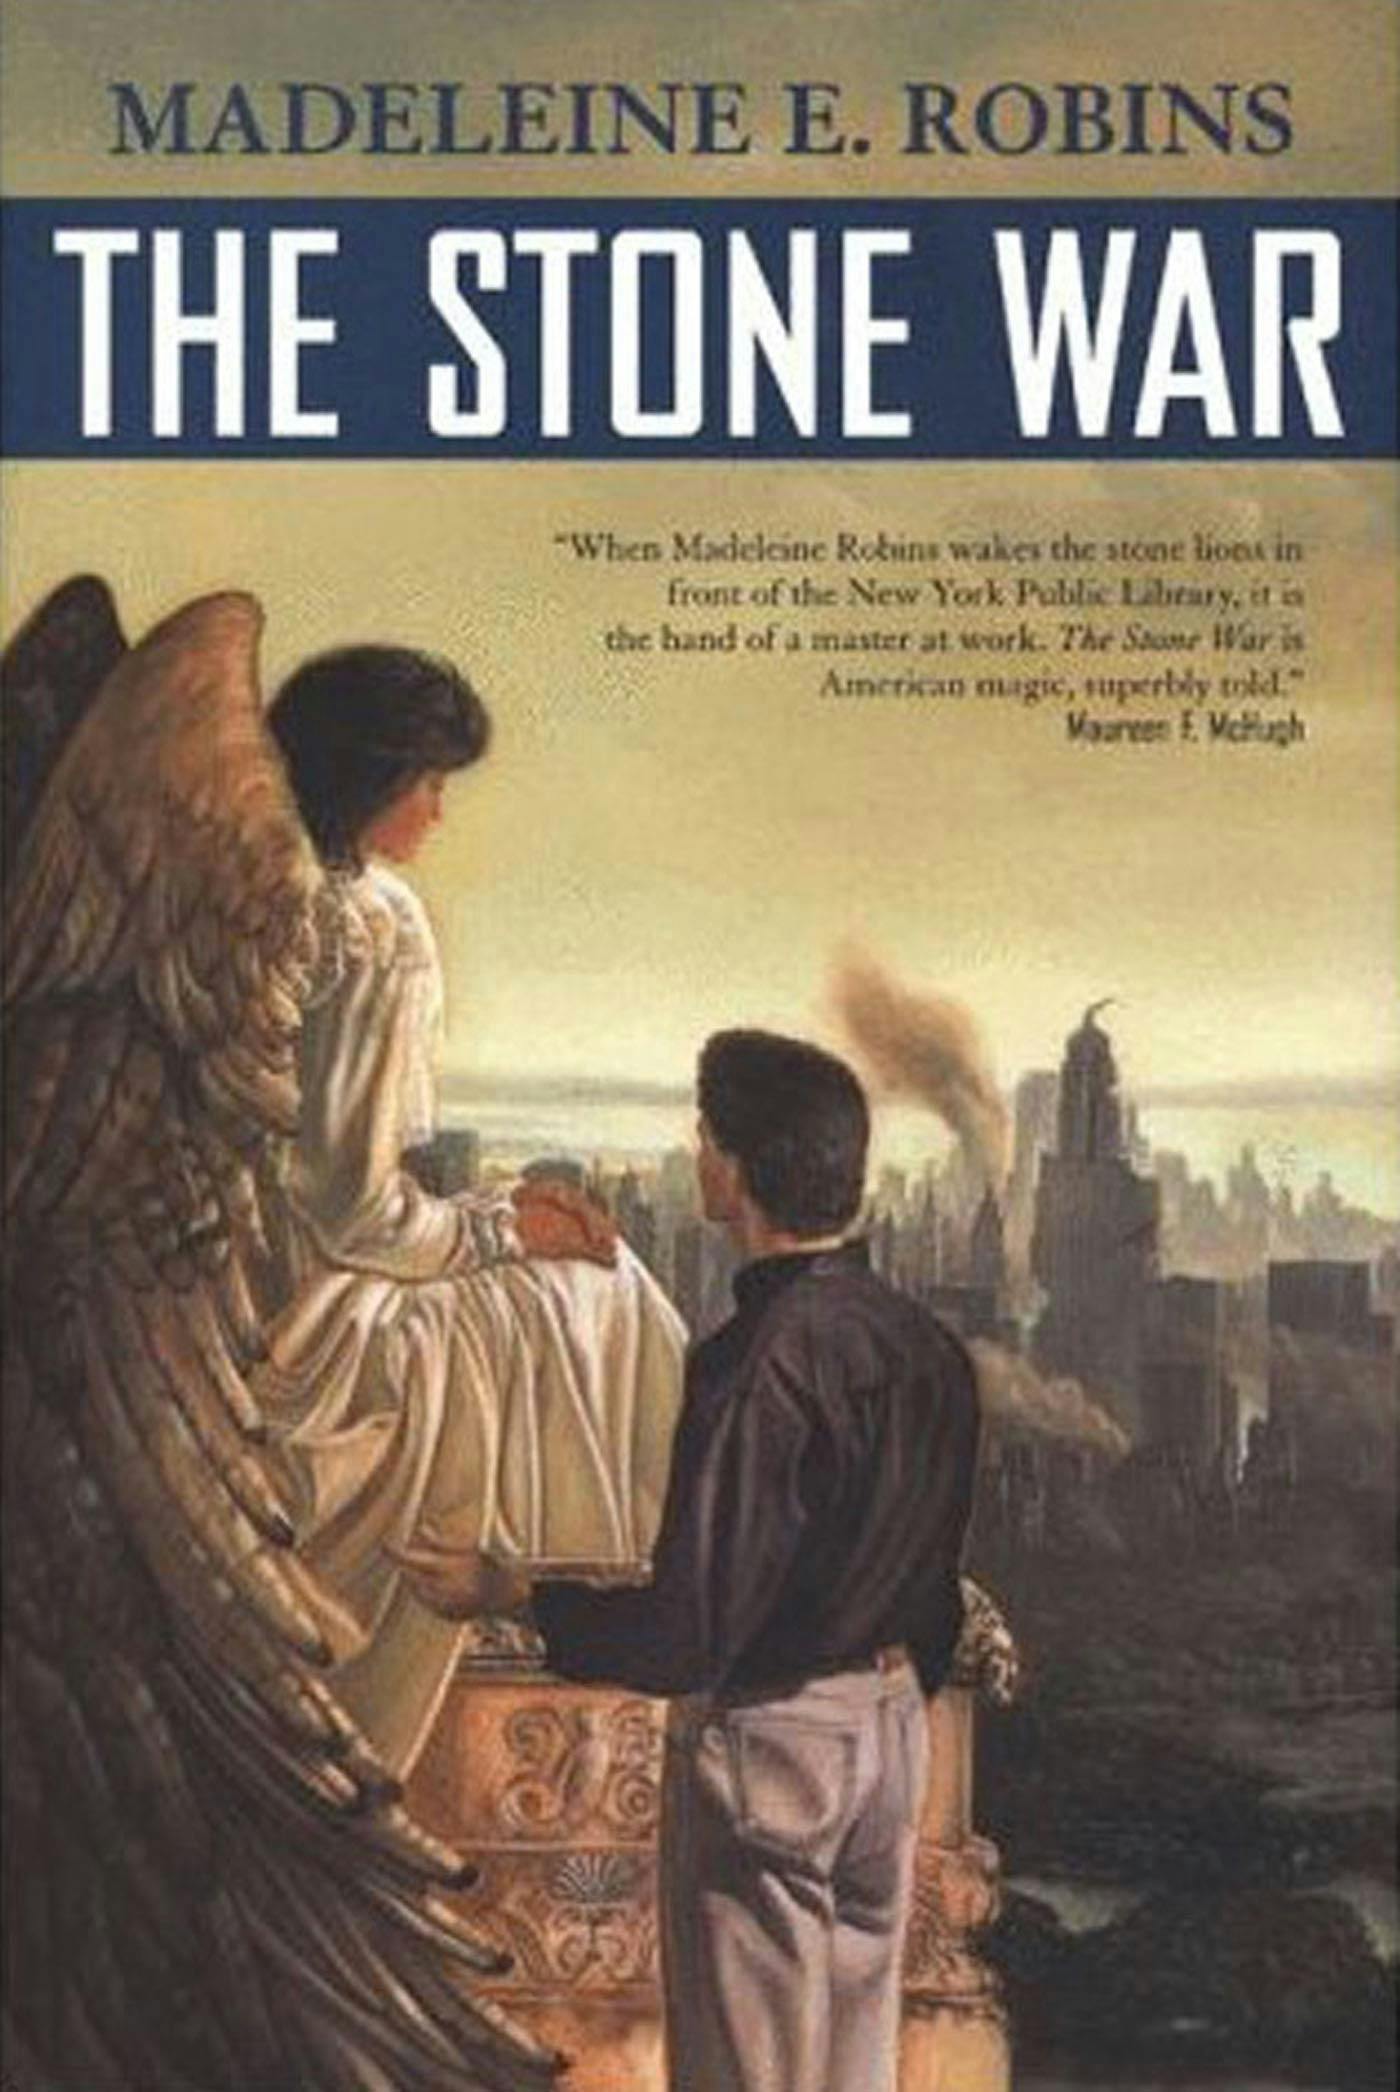 Cover for the book titled as: The Stone War